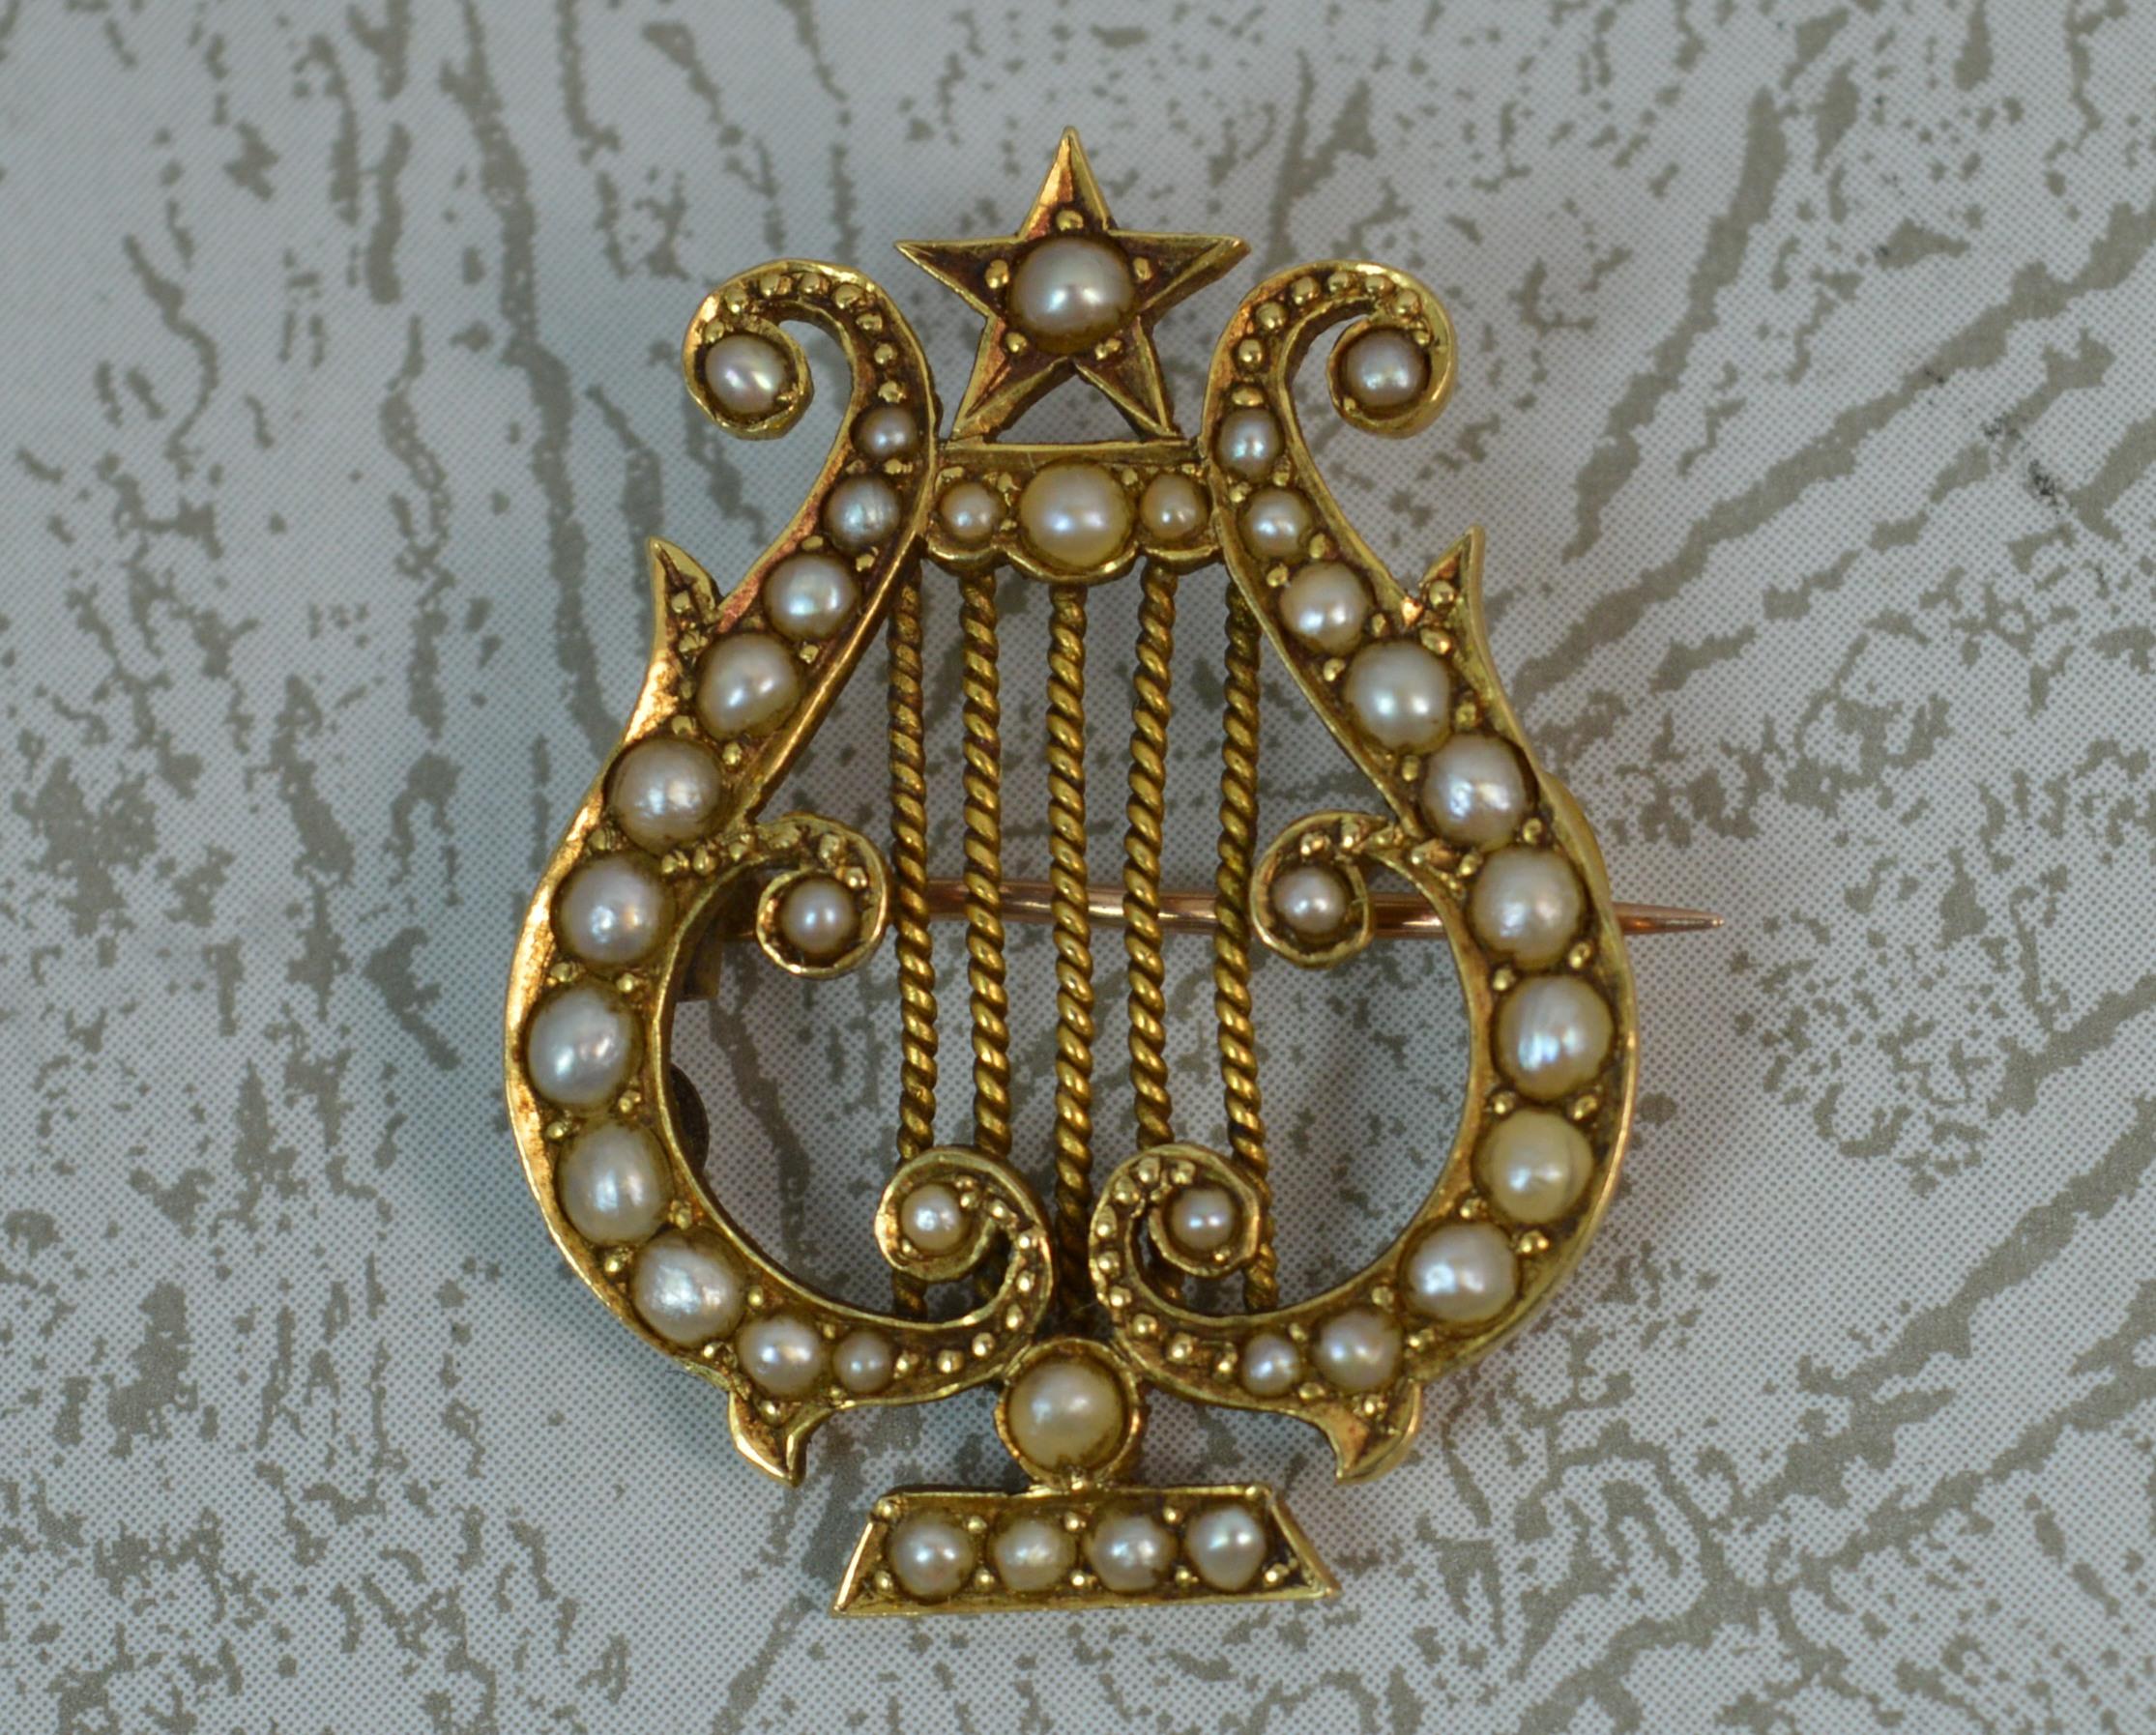 A fine 18 carat gold and seed pearl brooch. Modelled as a Lyre. 
True Victorian era, c1880. 
Well made example, attractive size.

CONDITION ; Excellent for age. Clean example. Securely set stones. Light wear only. Not perfectly straight in shape.